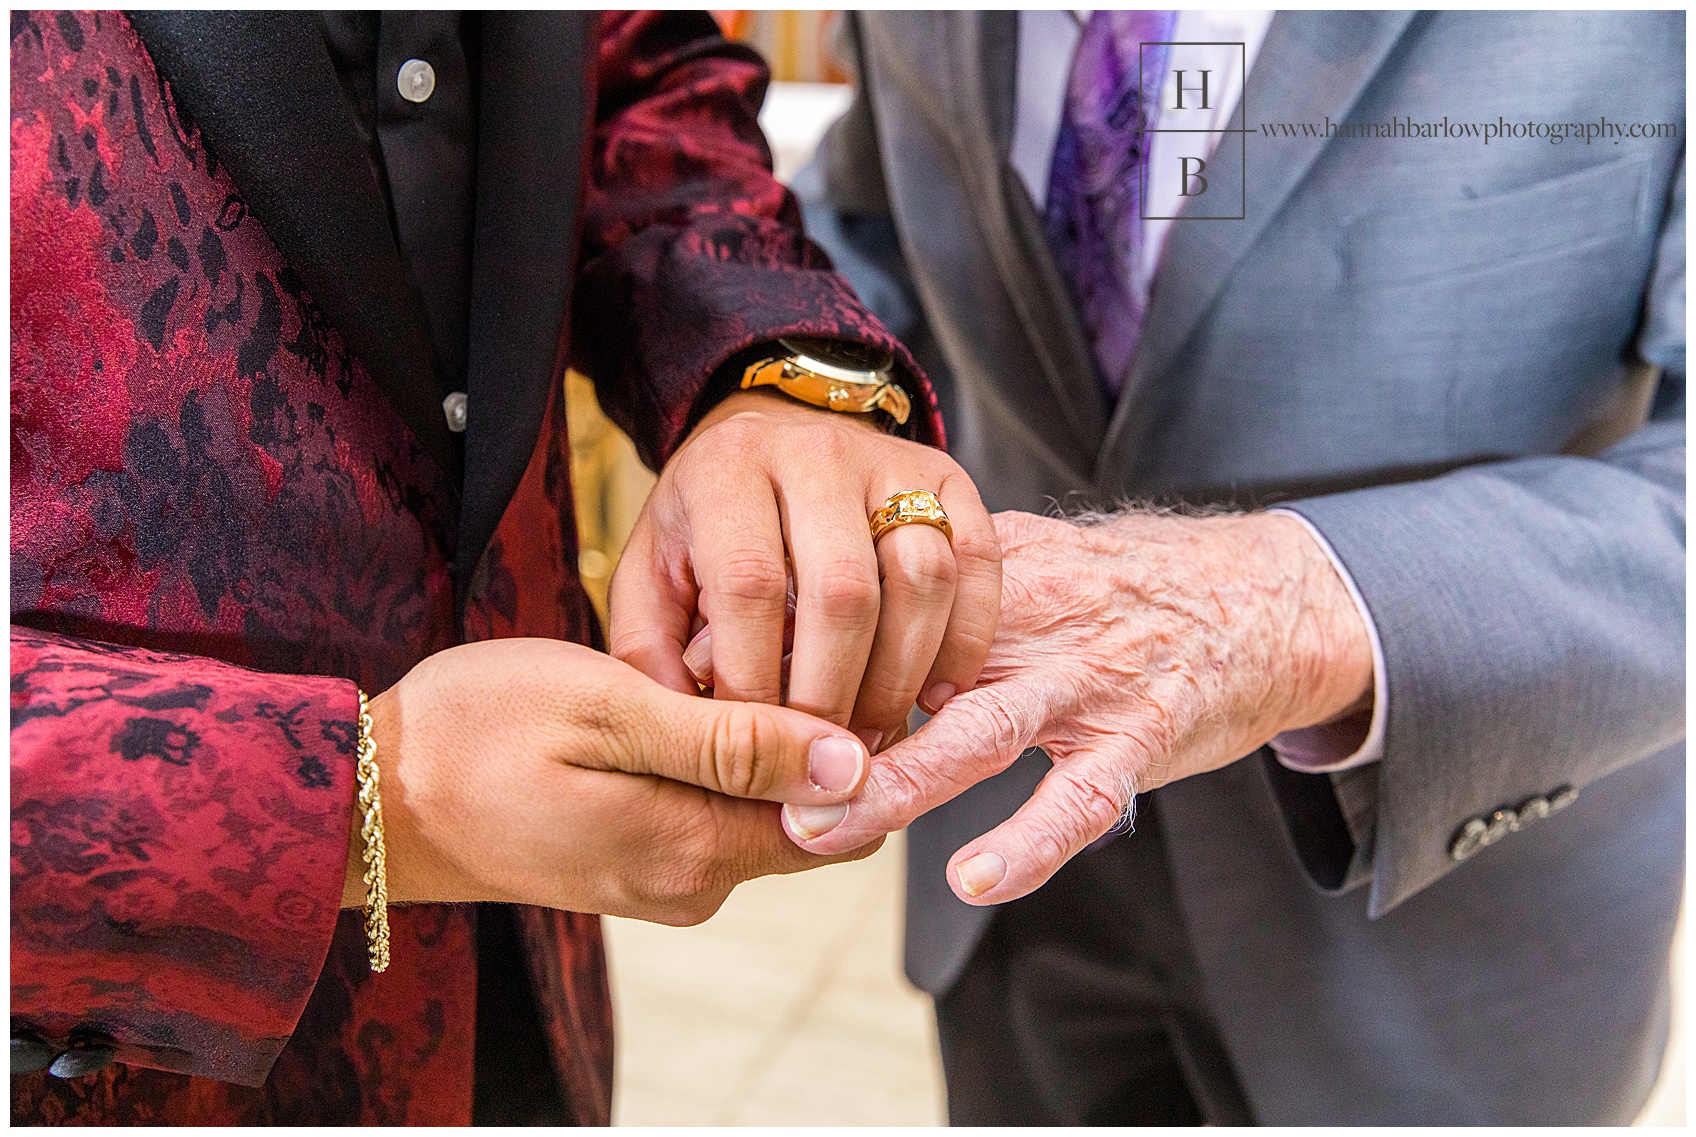 Groom Holding Grandfather's Hand while Wearing Grandfather's Ring